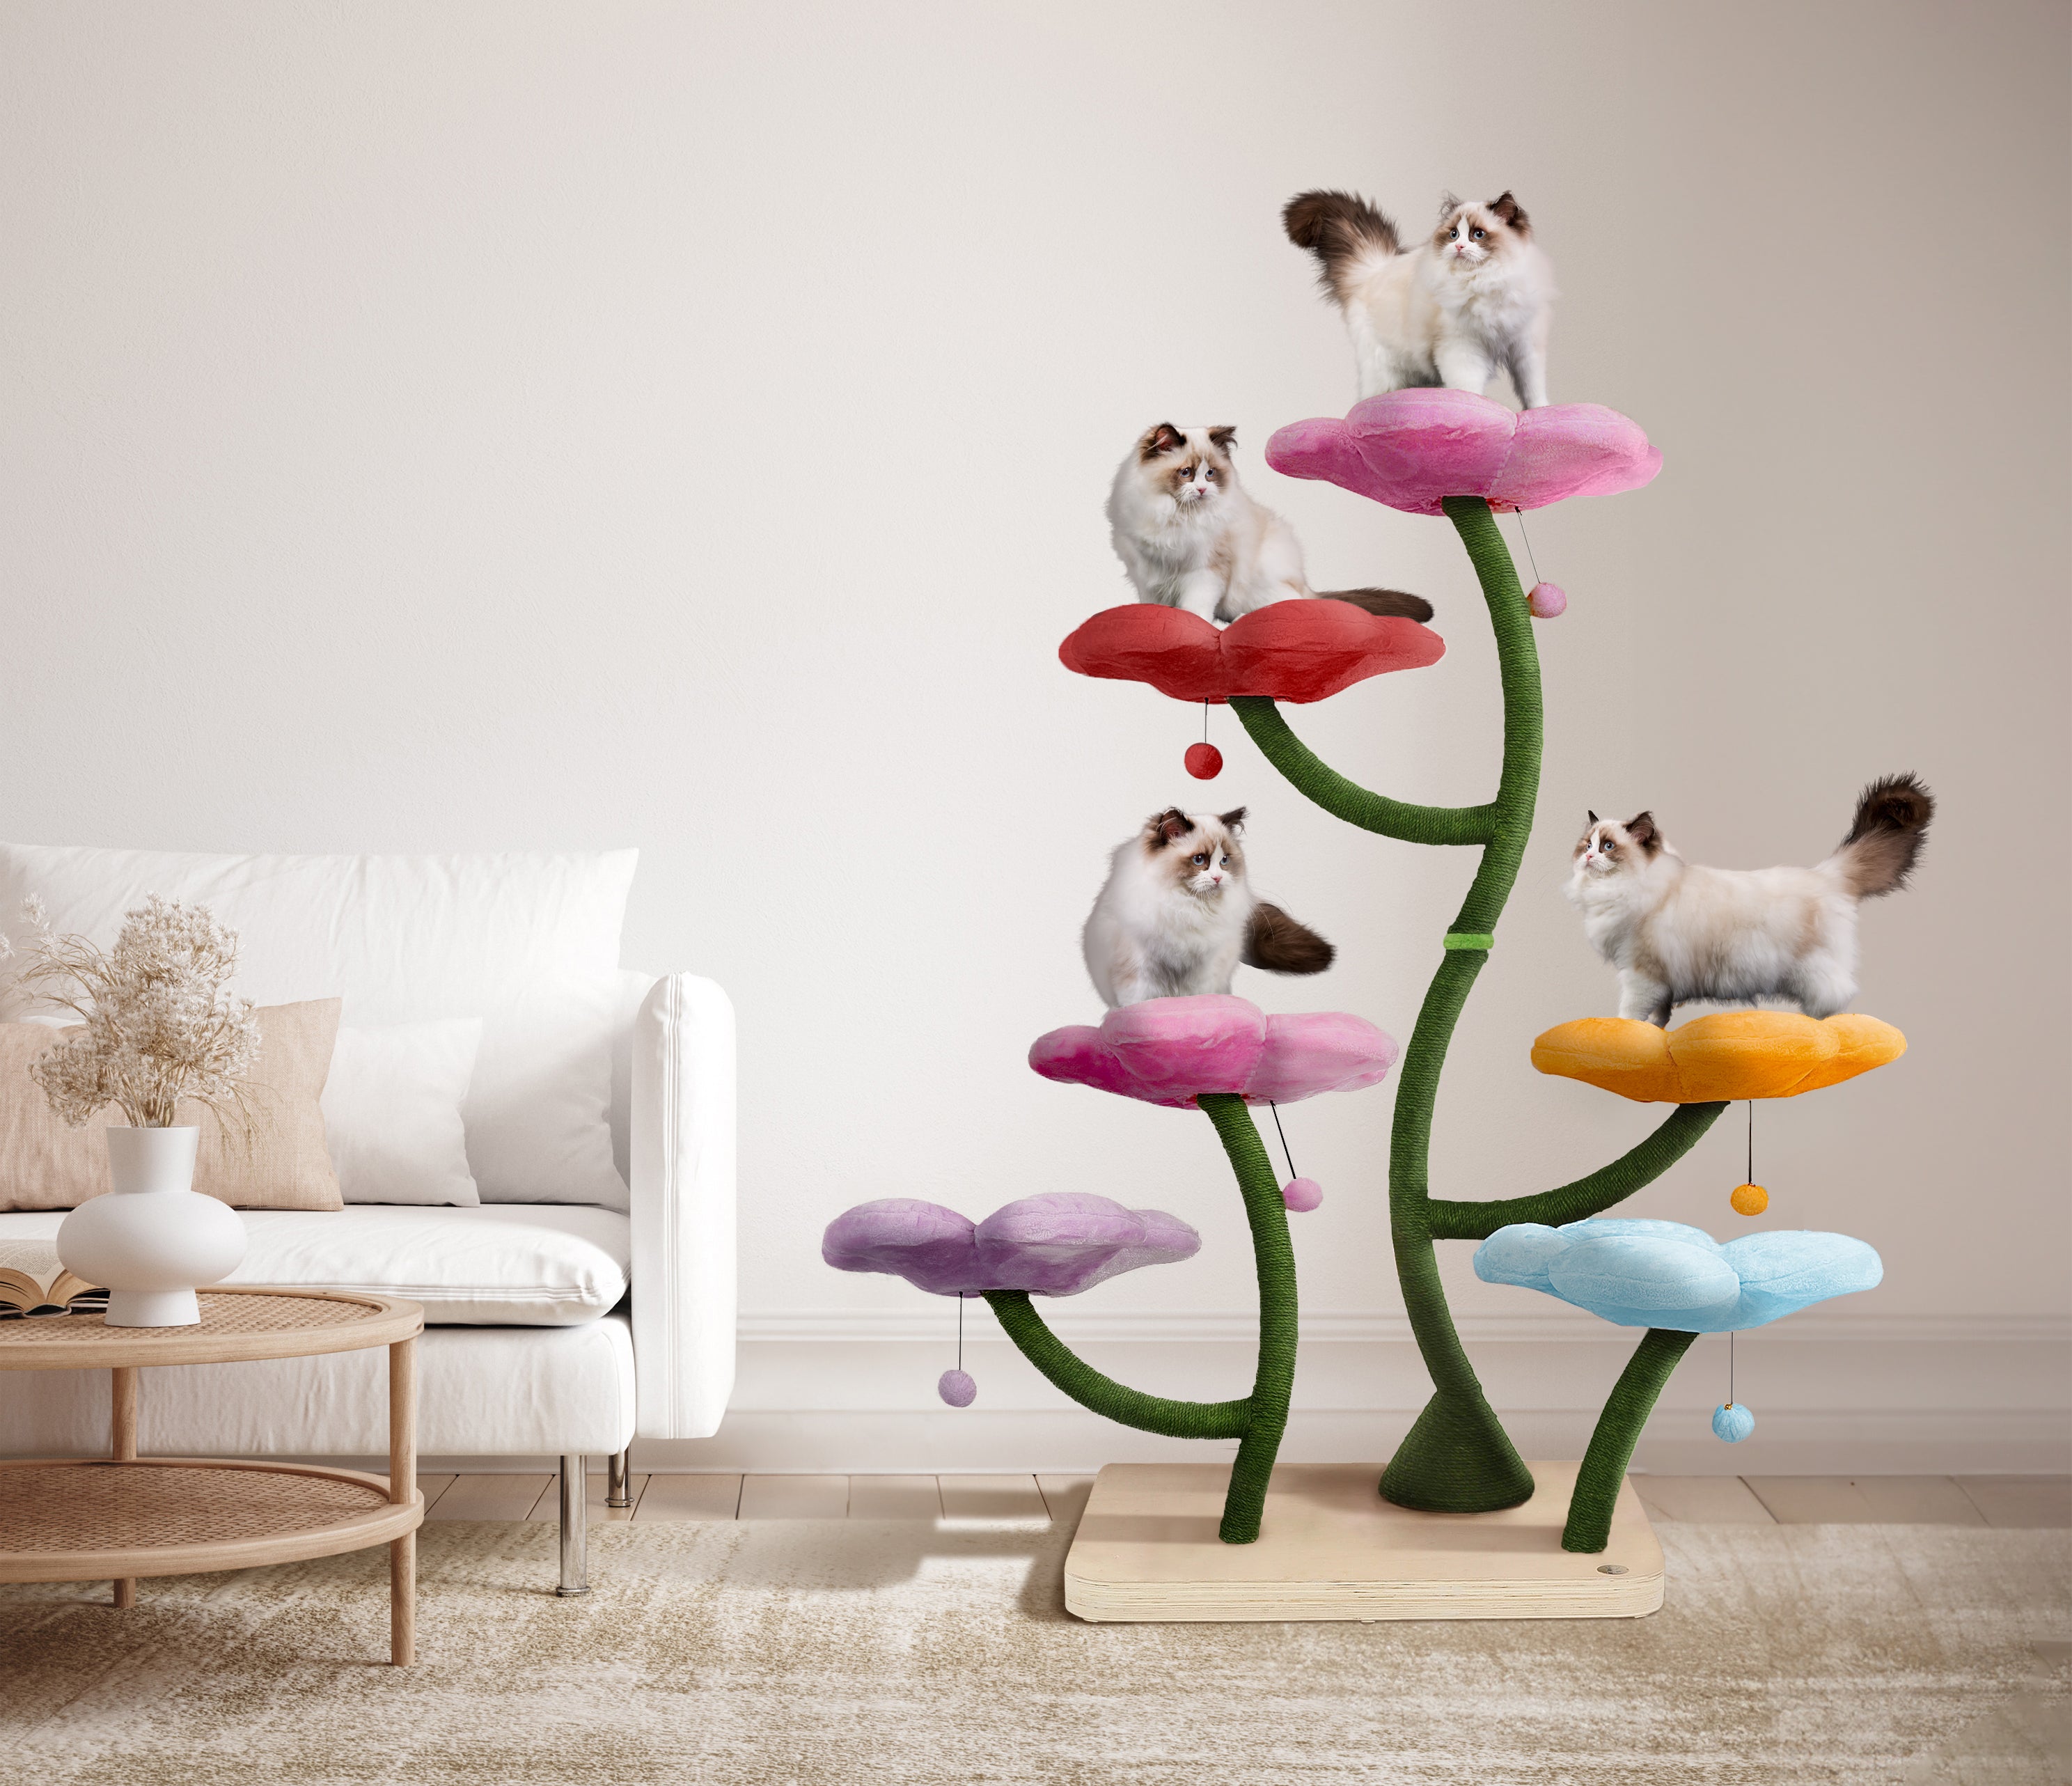 cat tree adorned with colorful flowers and playful cats